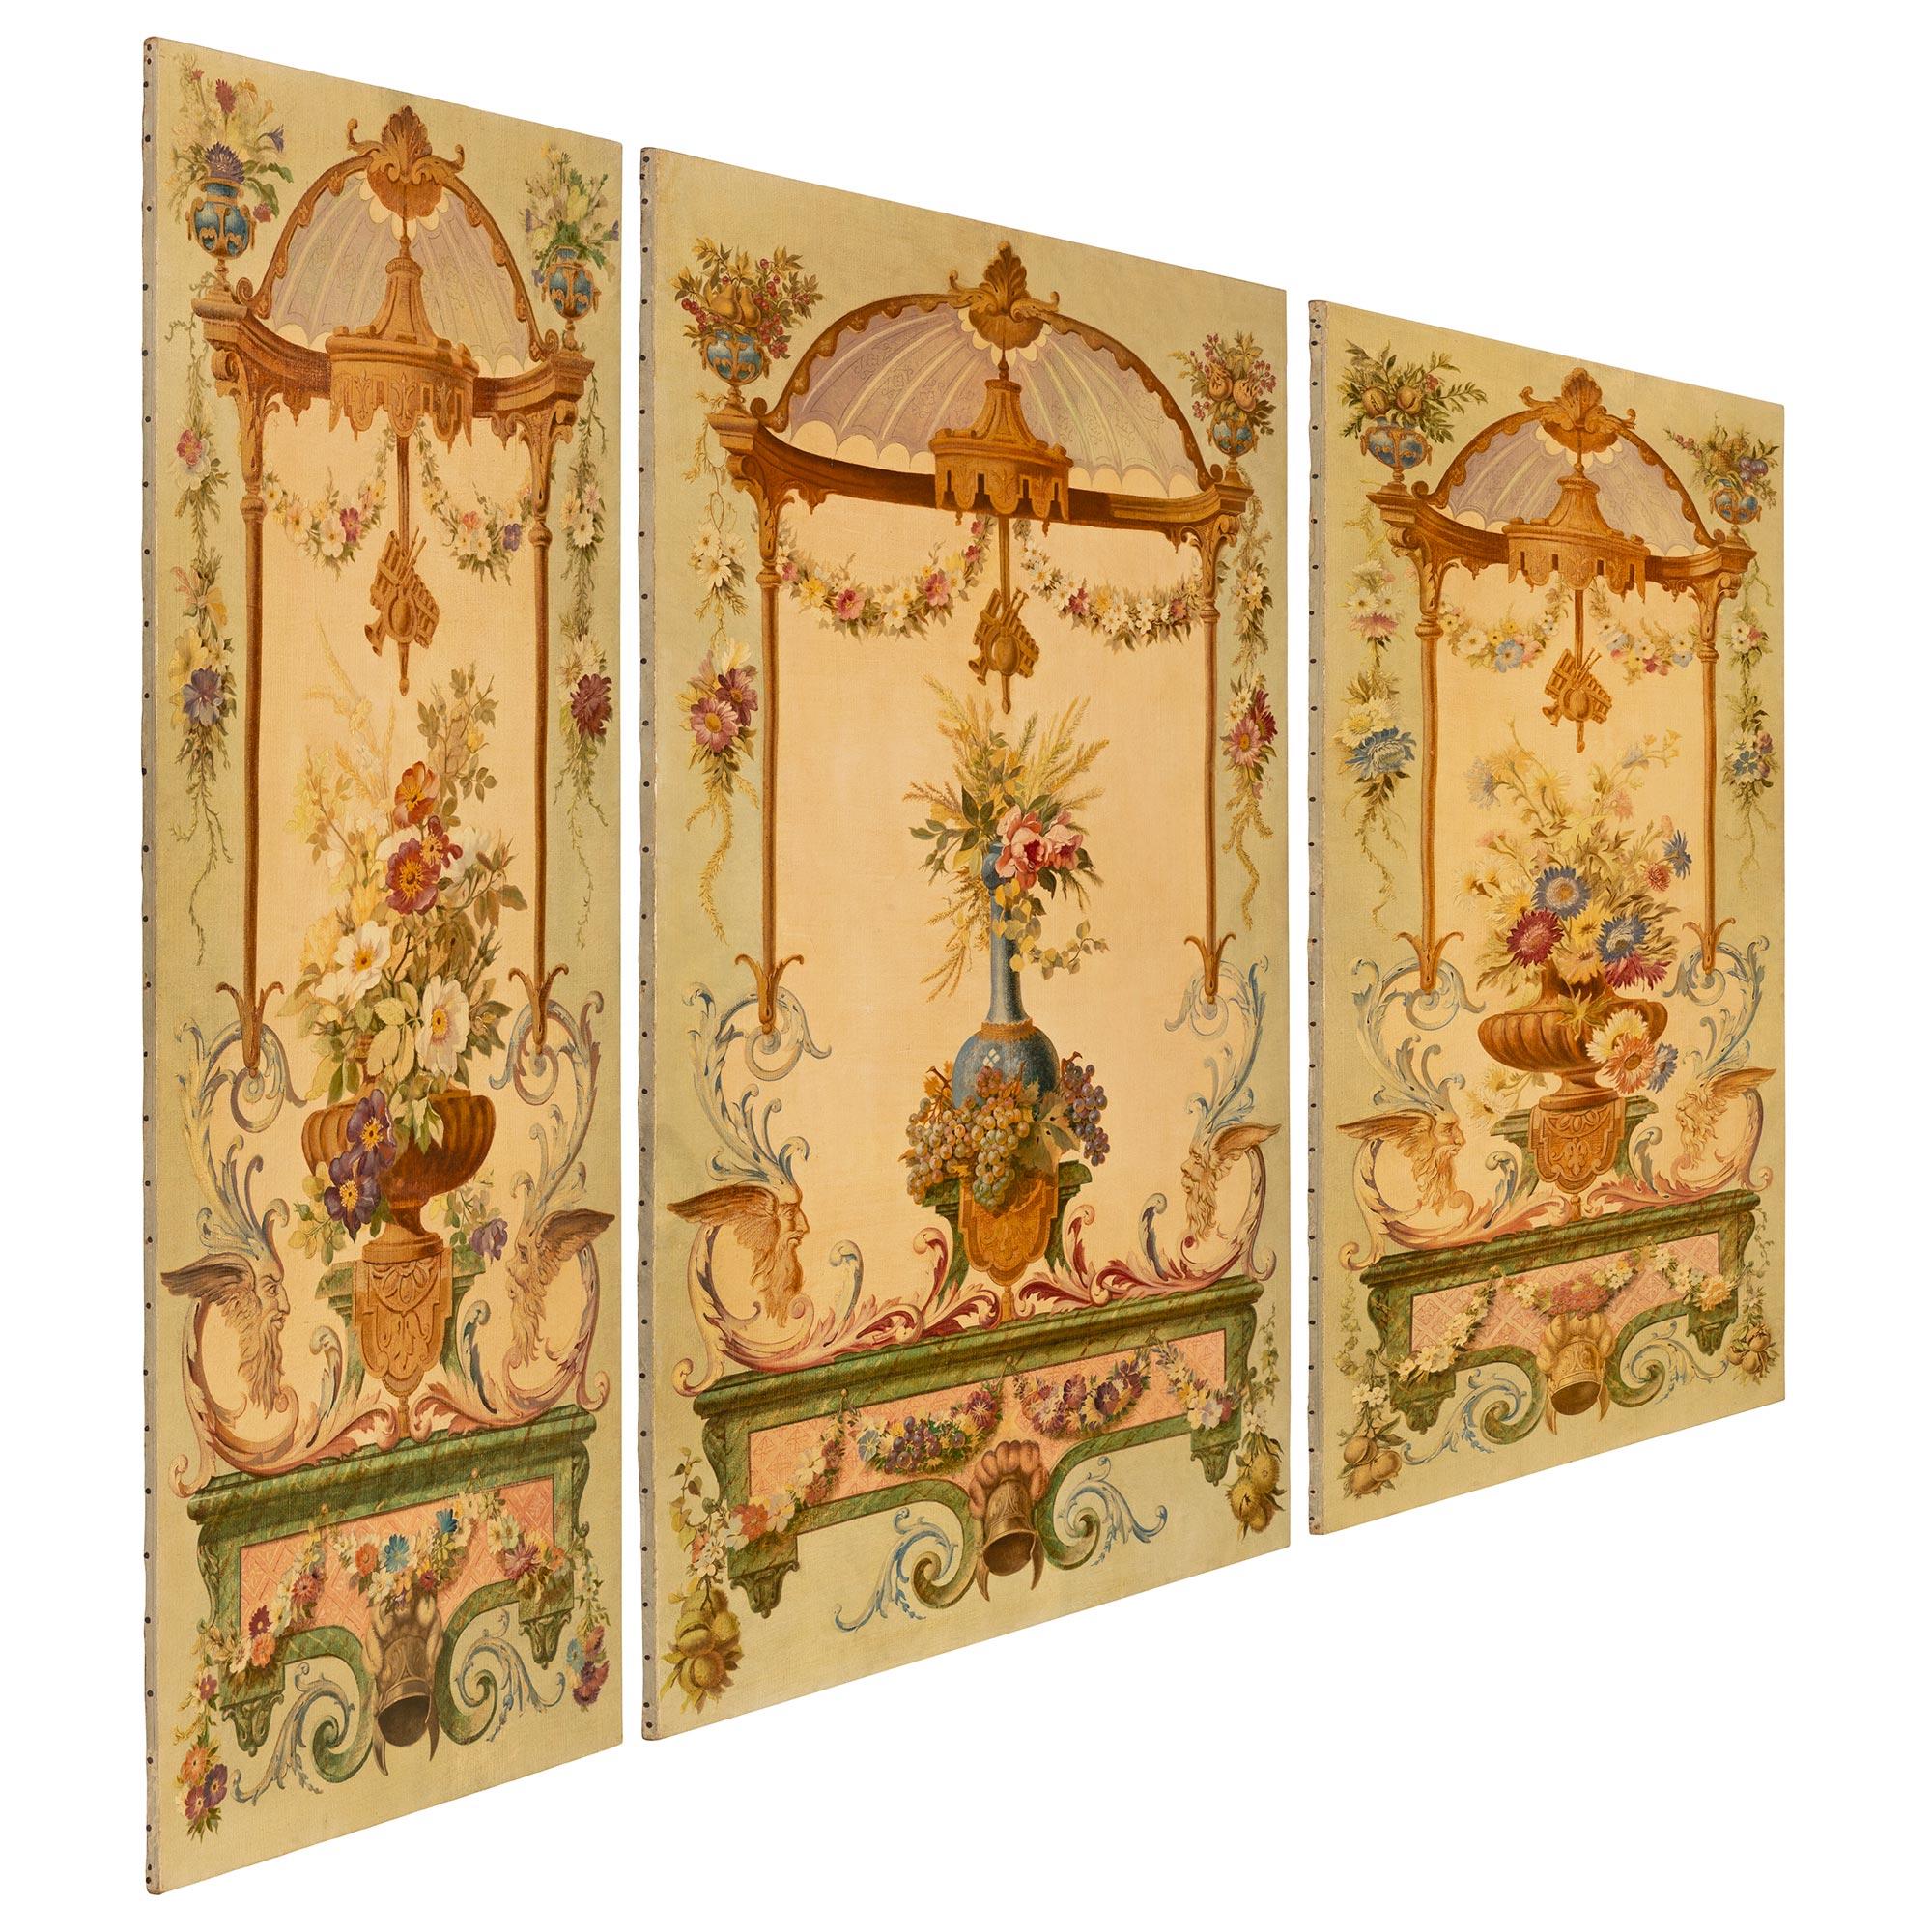 A striking and most elegant set of three Continental turn of the century Louis XVI st. hand painted decorative wall panels. Each rectangular panel displays beautiful finely detailed hand painted scrolled foliate designs and wonderful colorful